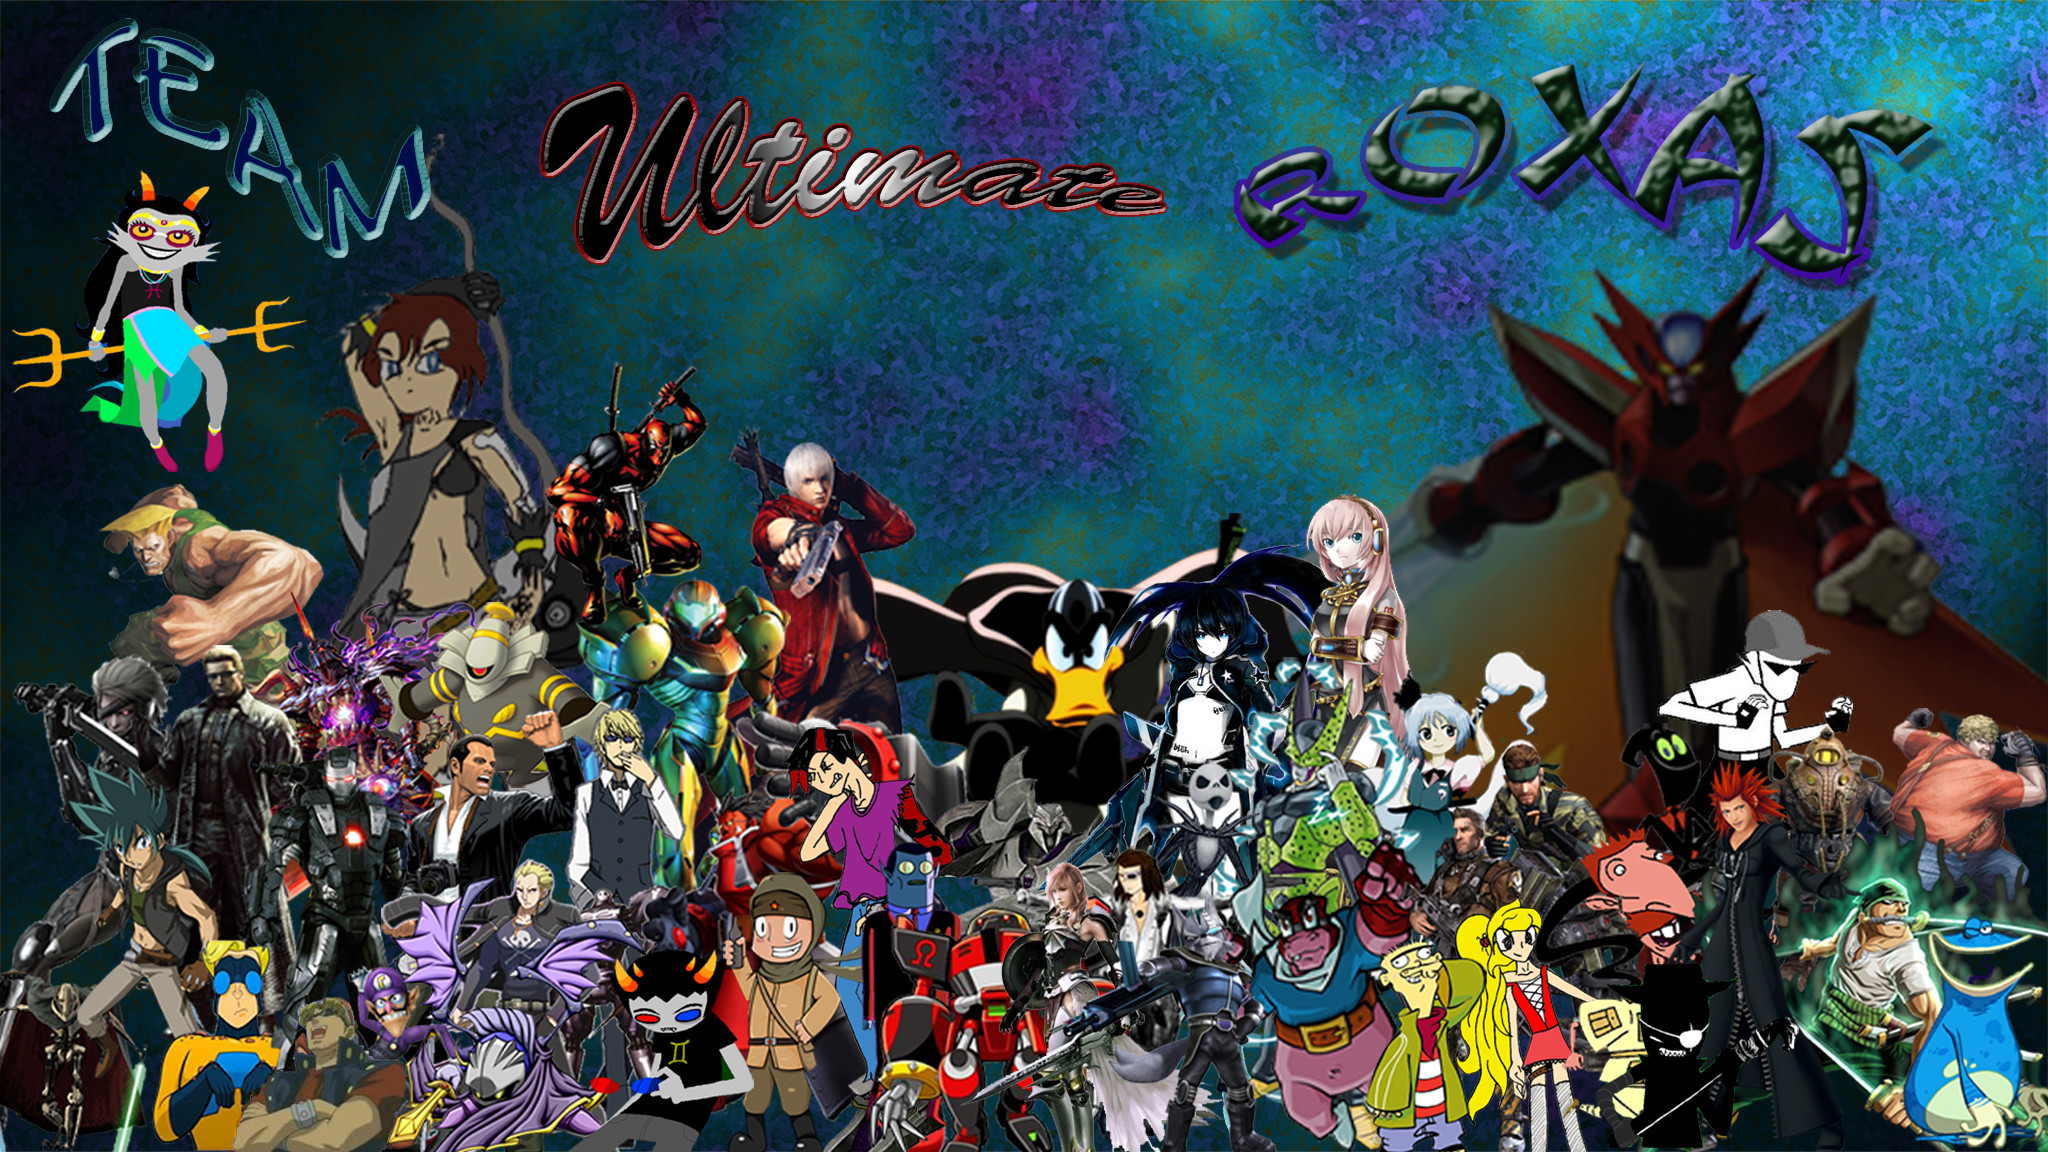 2048x1152 My Favorite Characters Wallpaper by DeCremer My Favorite Characters  Wallpaper by DeCremer